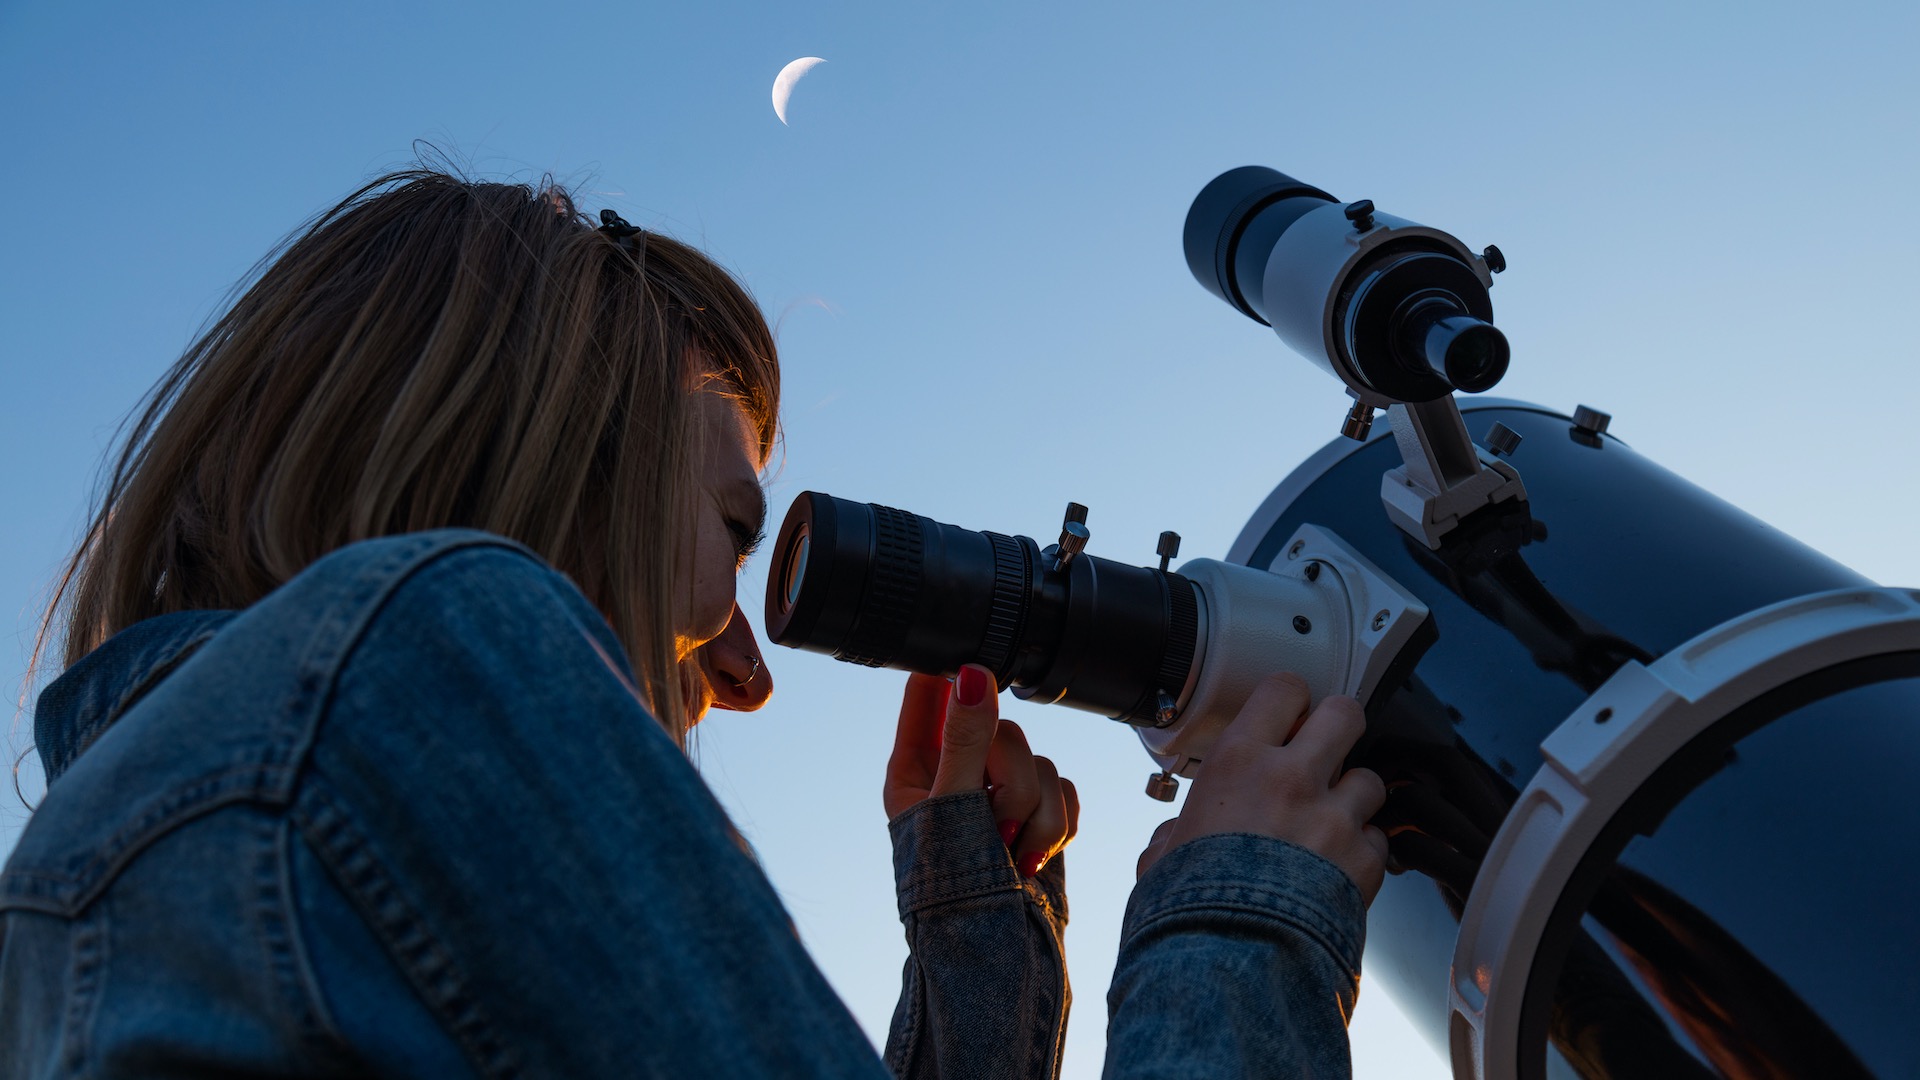 5 questions to consider before buying a telescope